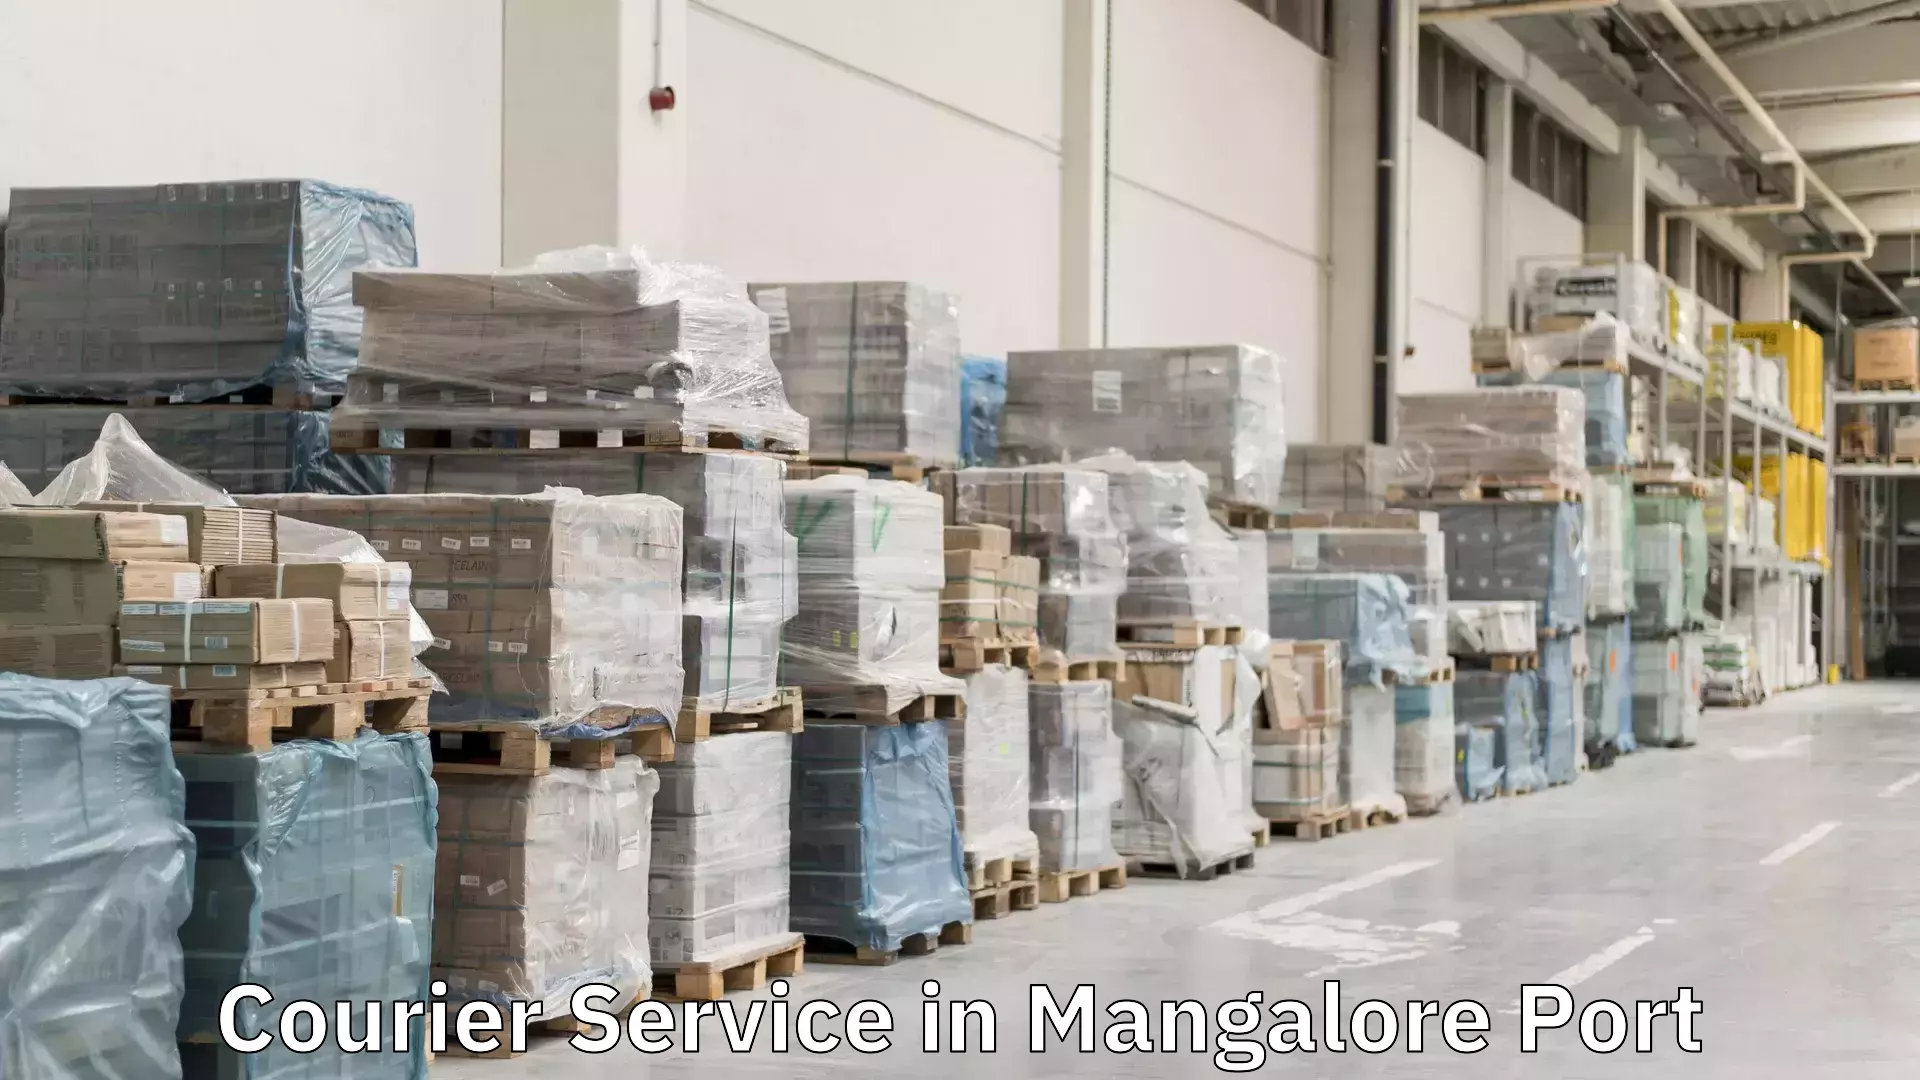 Express package transport in Mangalore Port